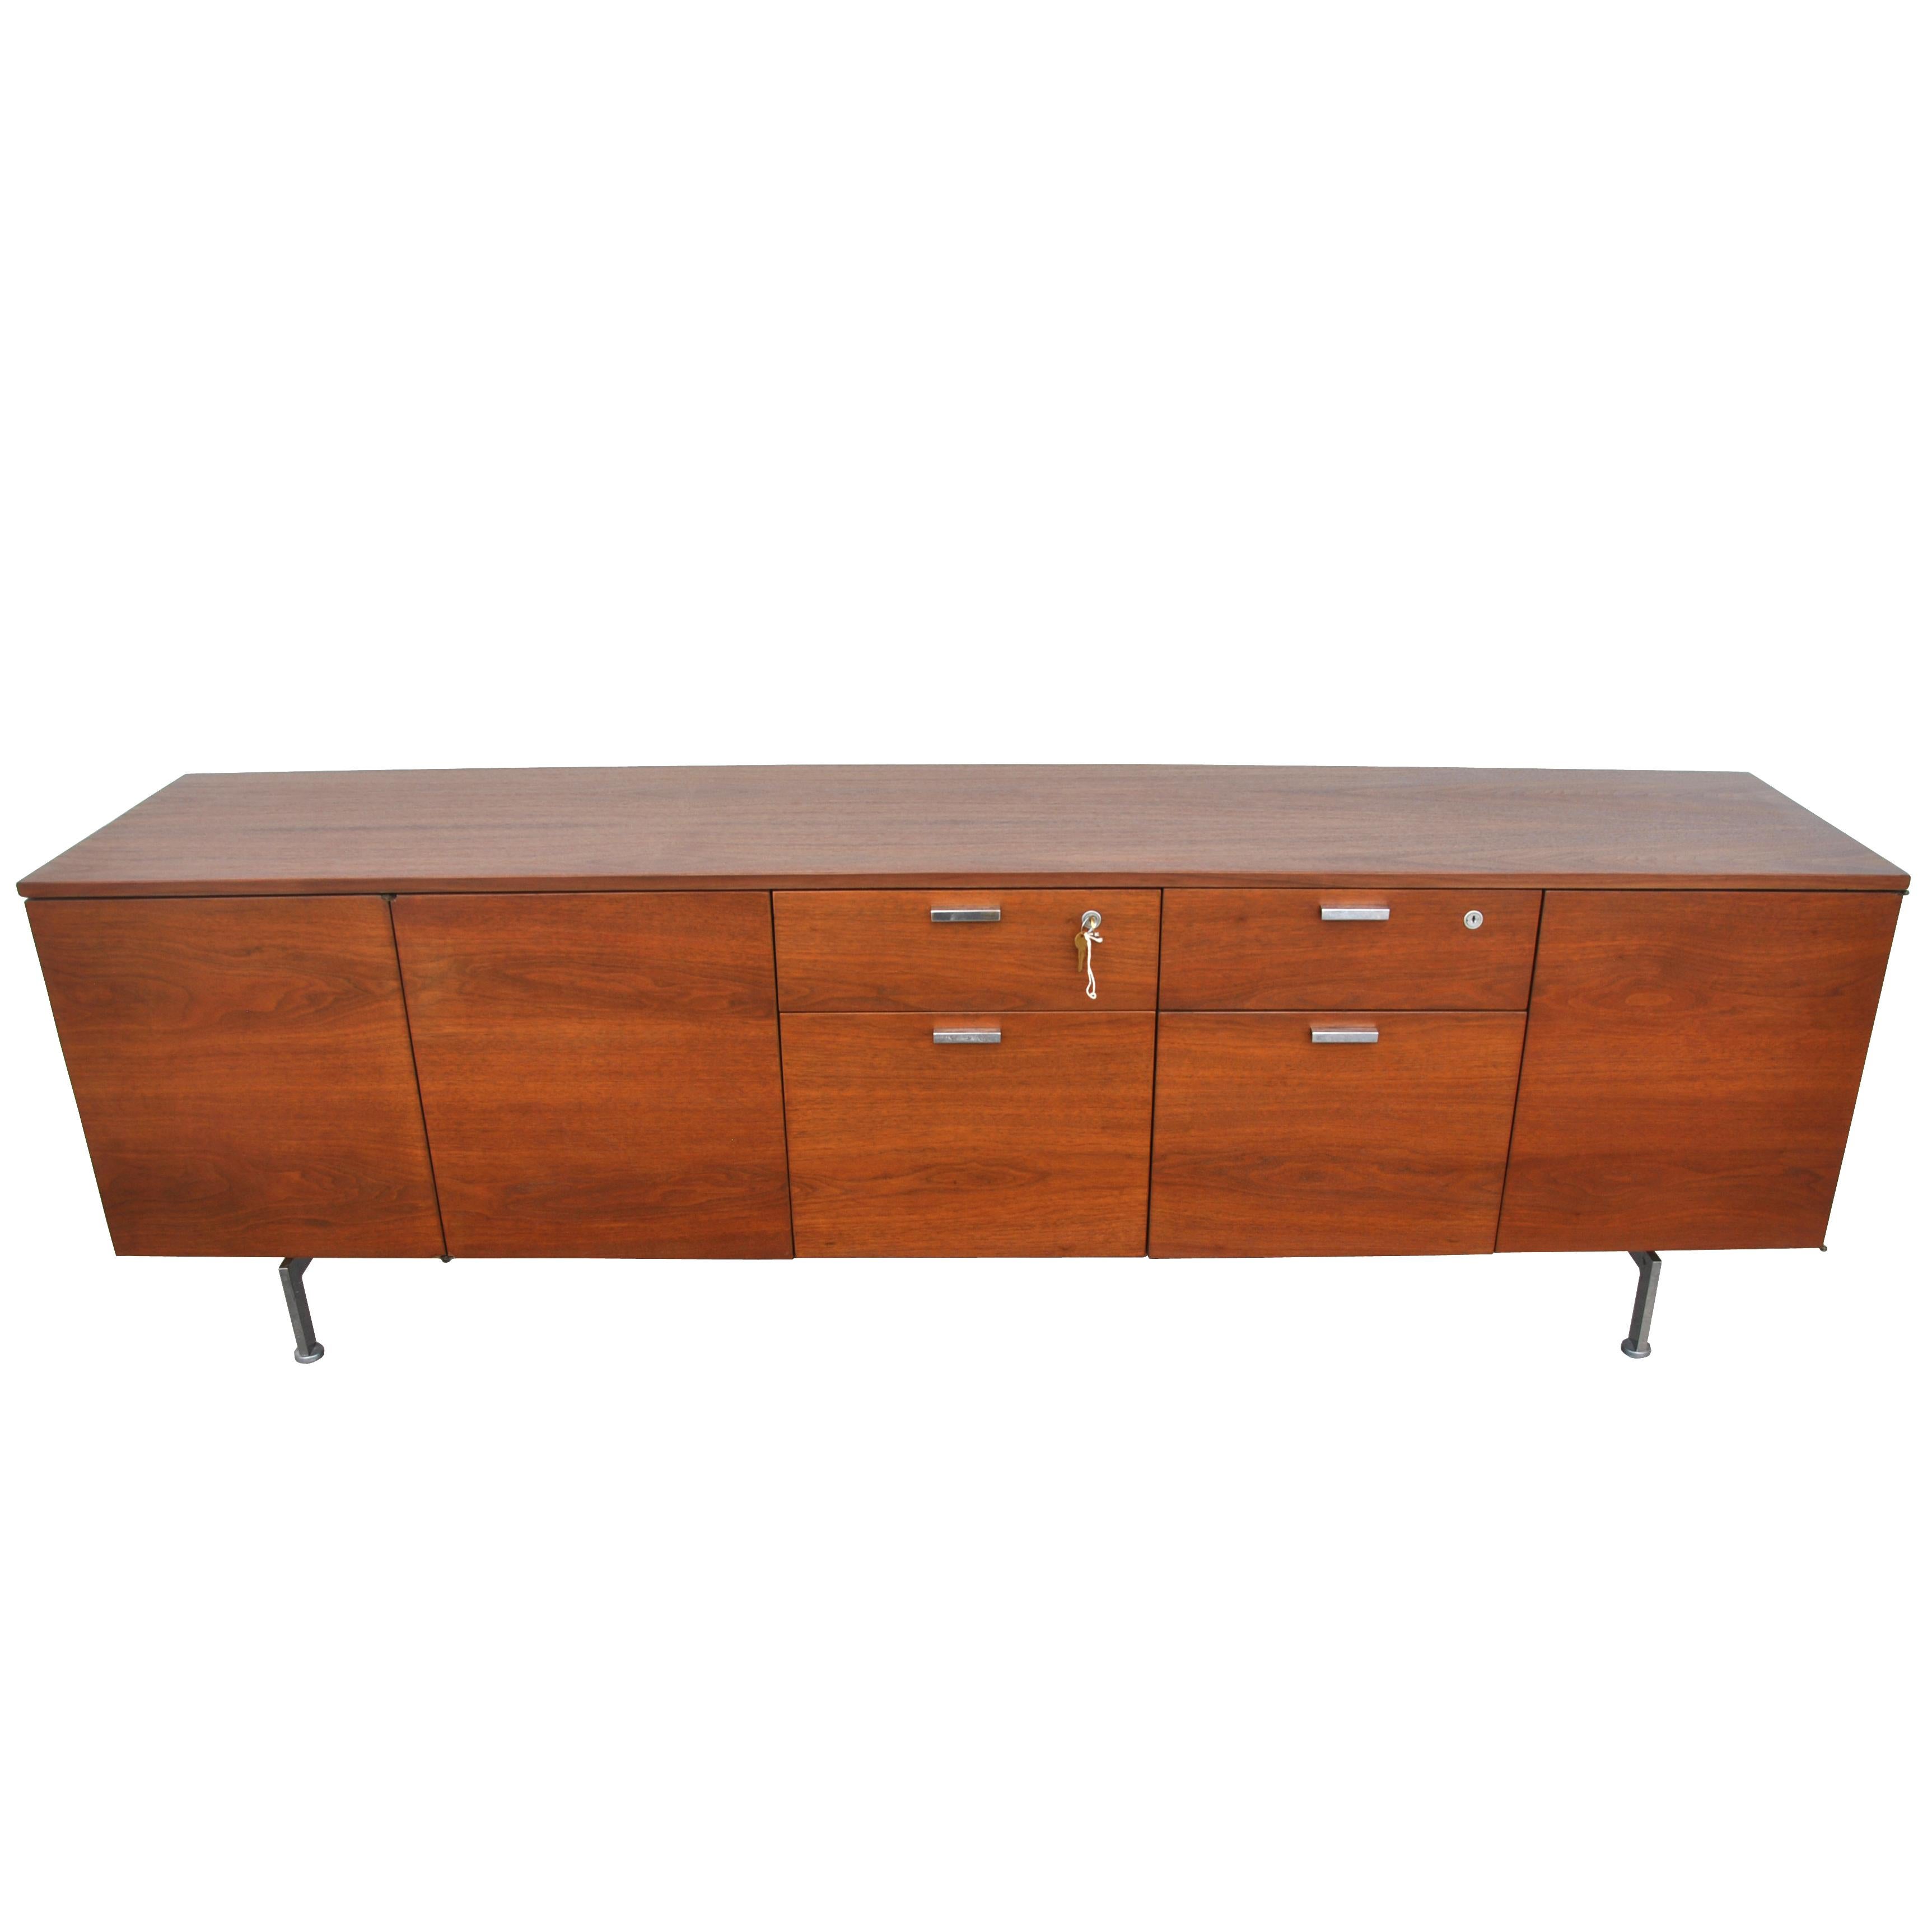 Vintage midcentury credenza by Robert John

Walnut with chrome legs. Chrome pulls. Two file drawers and two open cabinets with adjustable shelves. One exterior door folds back onto the stationary door when shelving is exposed. Locking mechanism